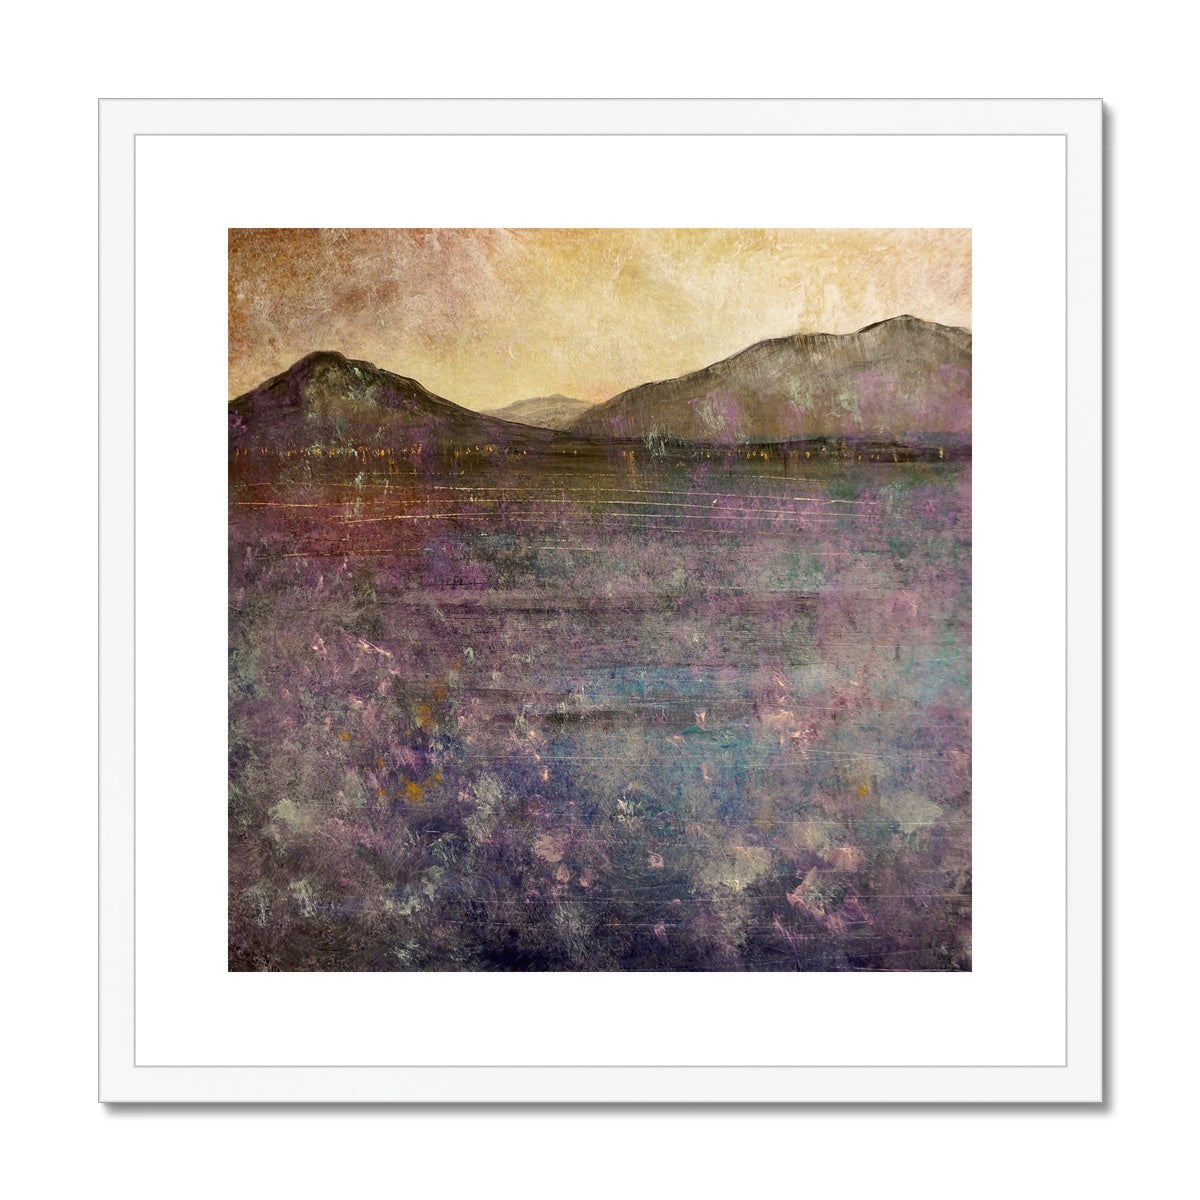 River Clyde Winter Dusk Painting | Framed & Mounted Prints From Scotland-Framed & Mounted Prints-River Clyde Art Gallery-20"x20"-White Frame-Paintings, Prints, Homeware, Art Gifts From Scotland By Scottish Artist Kevin Hunter